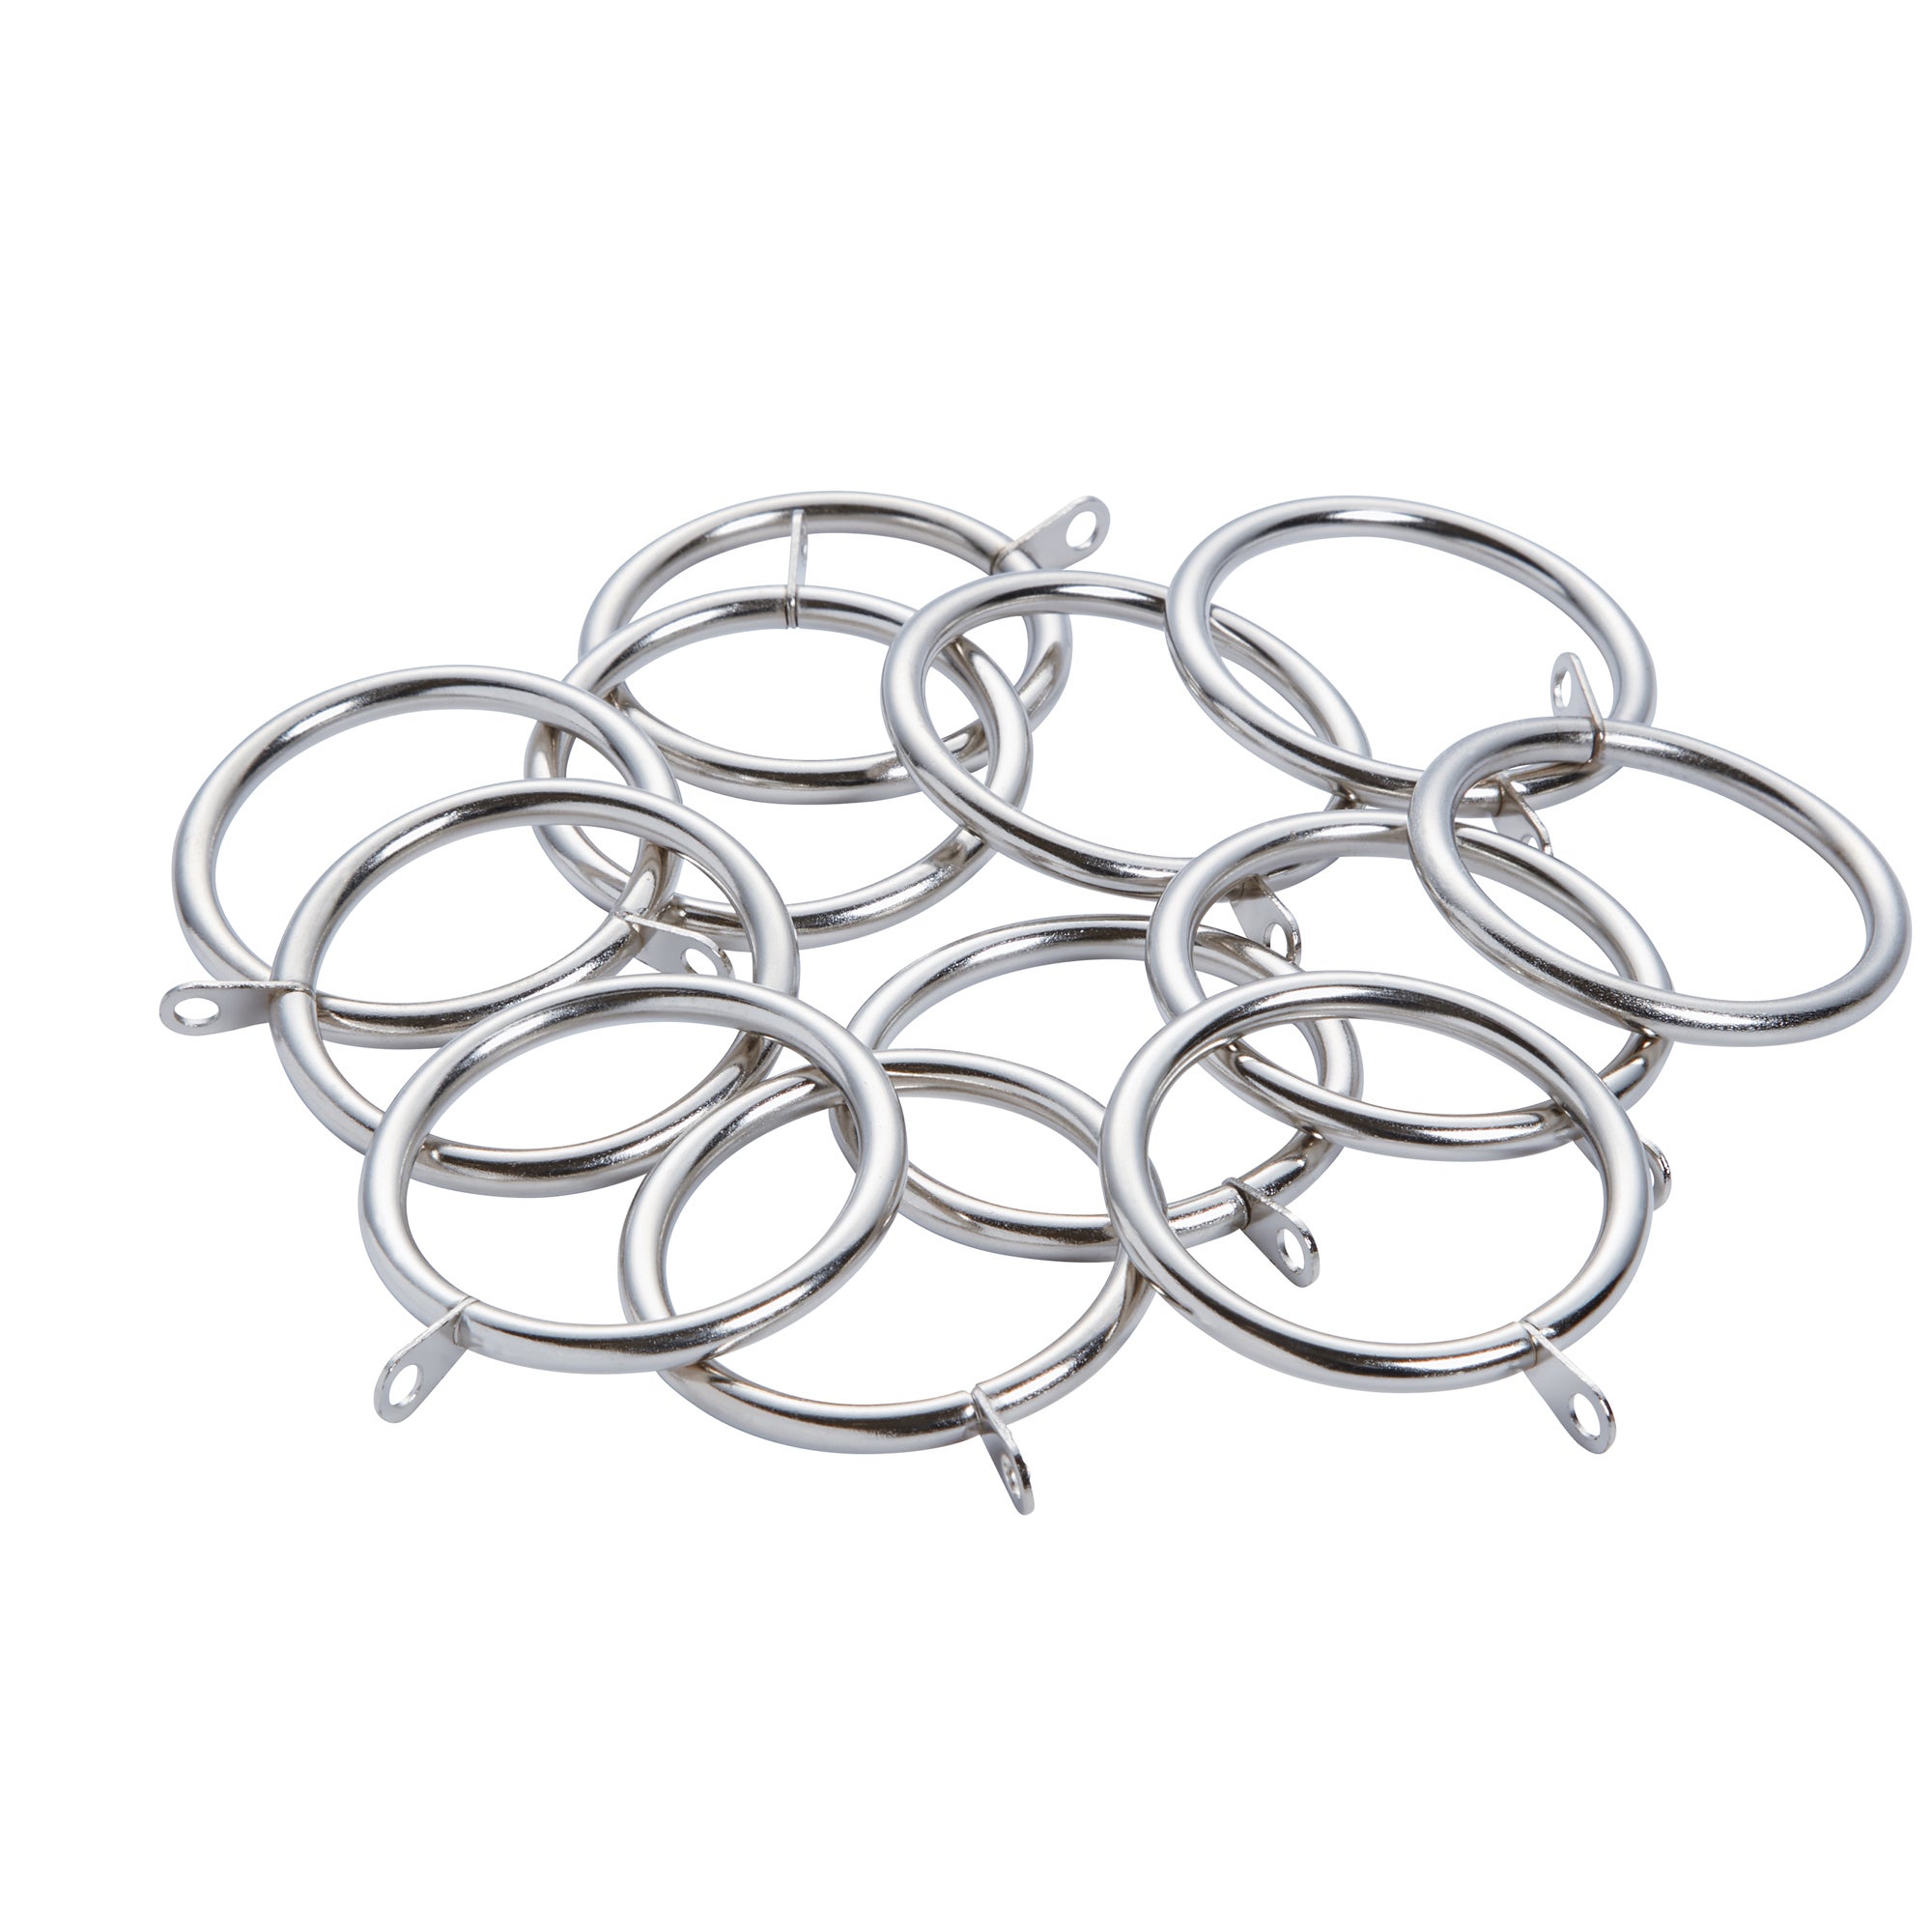 Mix And Match Pack Of 12 Unlined Curtain Rings Dia 28mm Silver